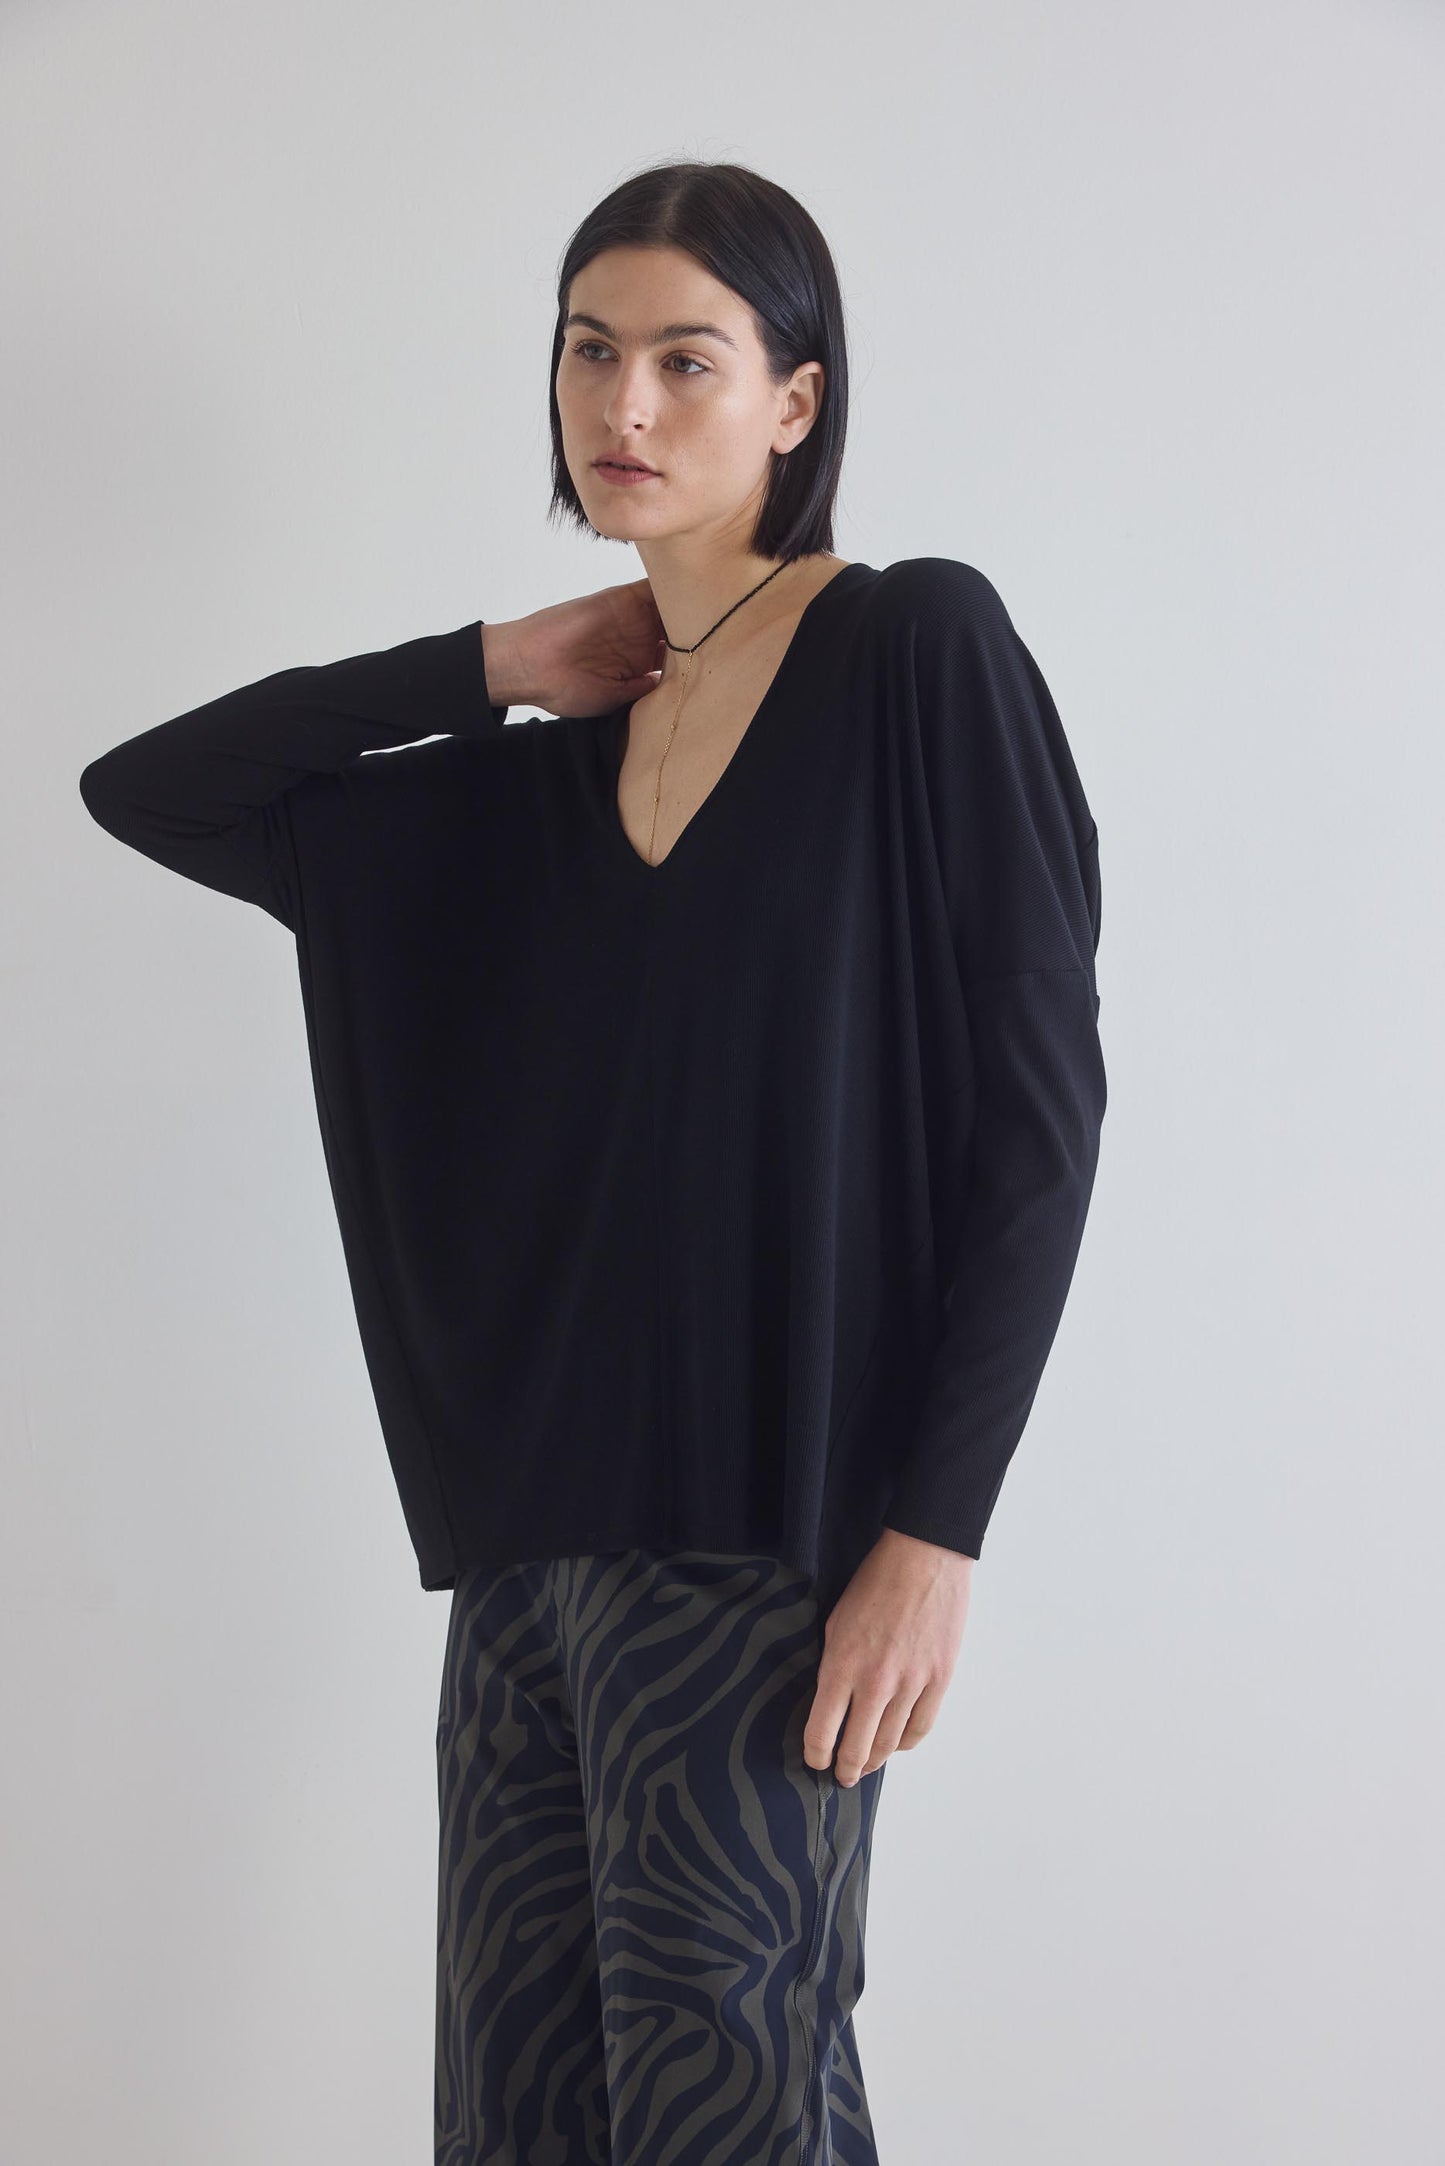 The Ribbed Dolman Long Sleeve Top